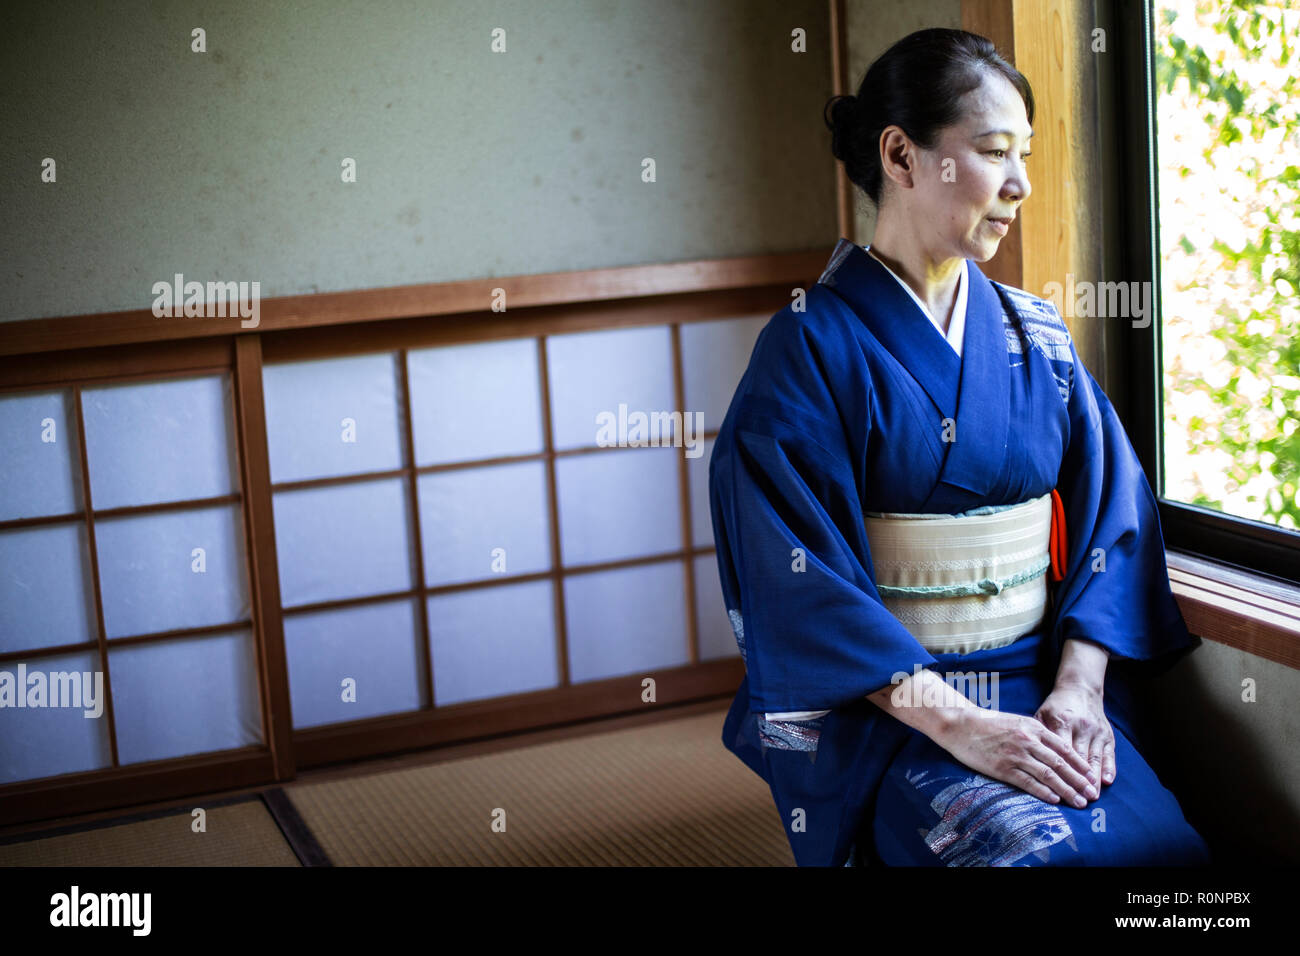 Japanese woman wearing traditional bright blue kimono with cream coloured obi kneeling on floor in traditional Japanese house. Stock Photo